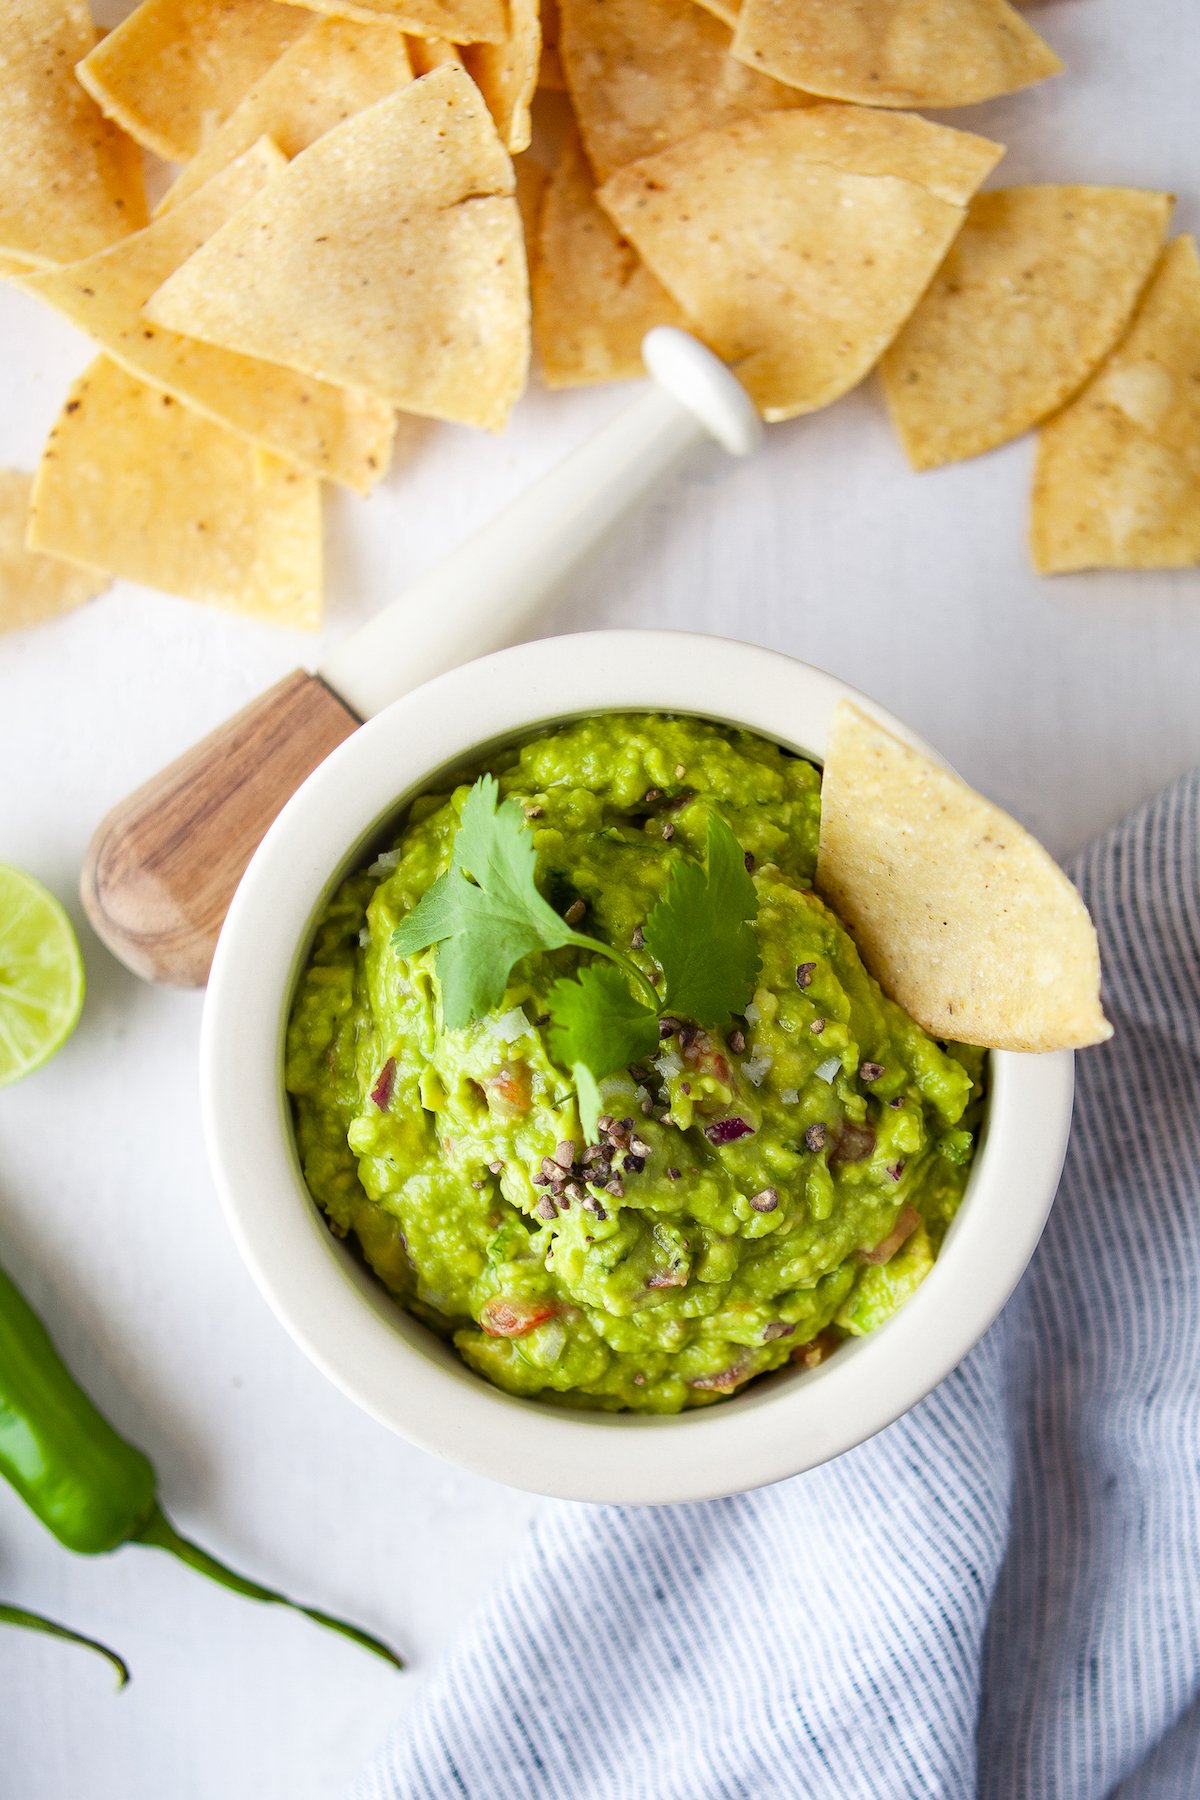 A bowl of guacamole with a tortilla chip garnish. More tortilla chips are scattered across the table.